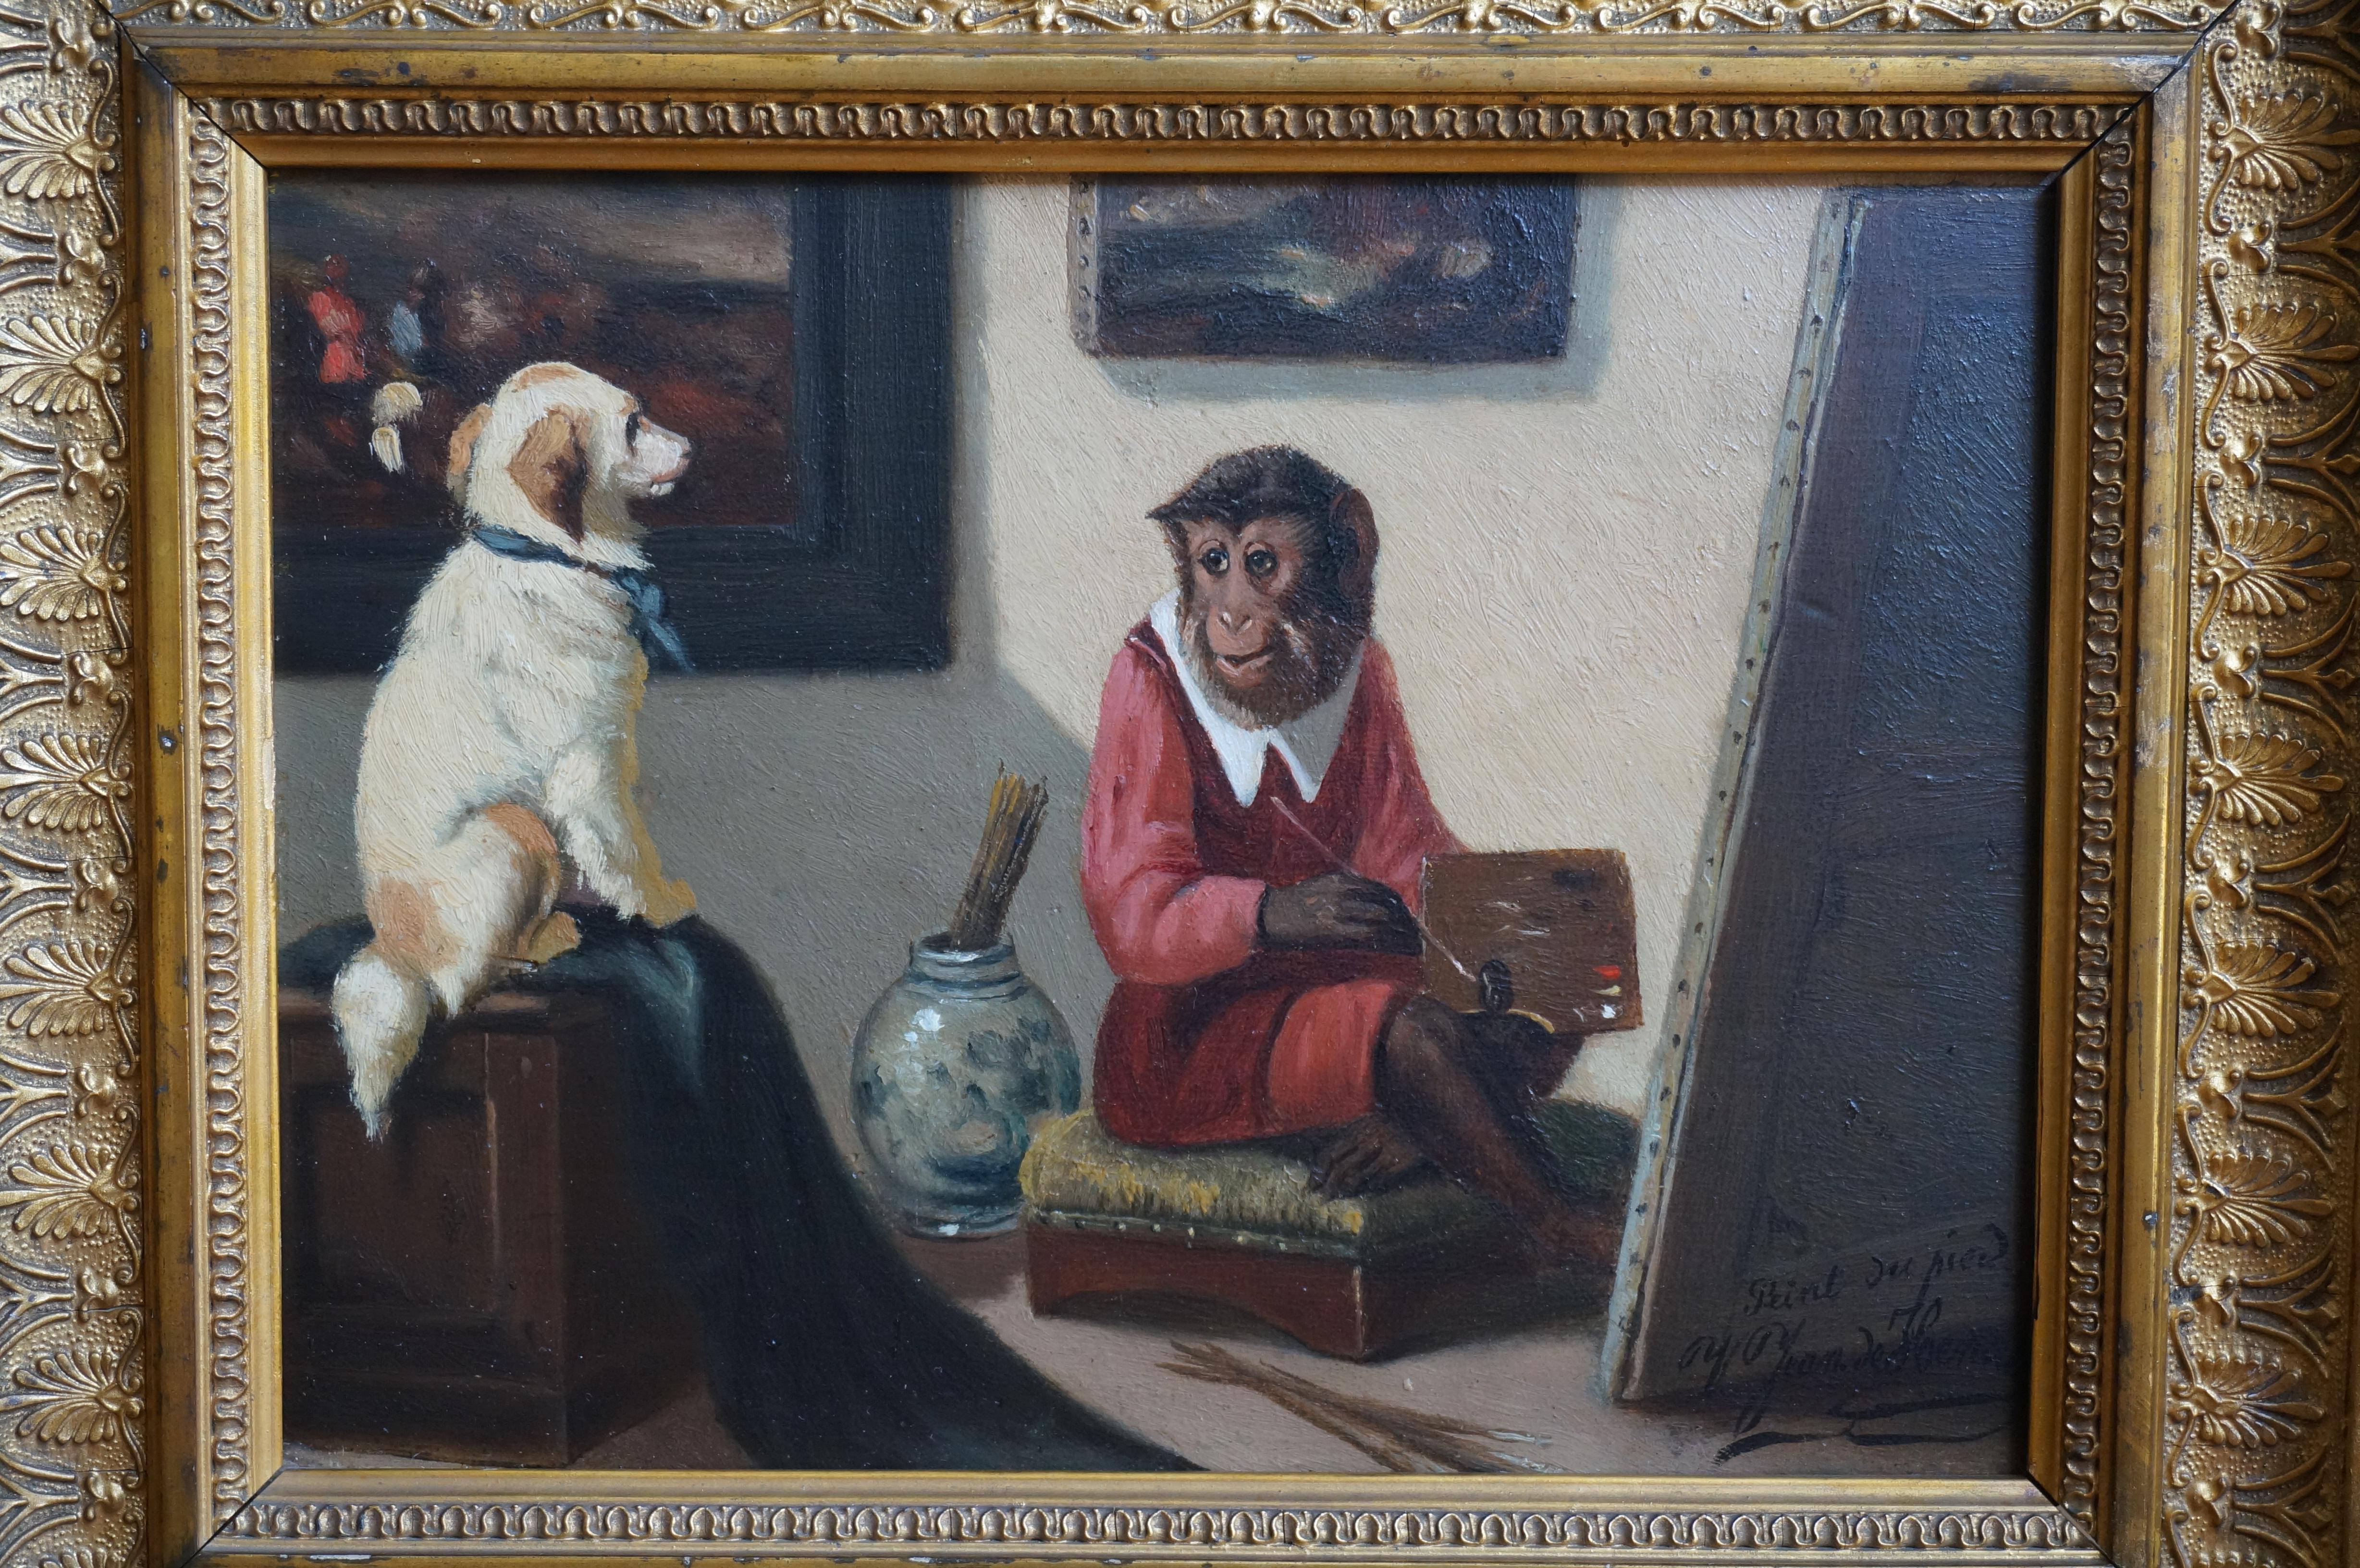  Singerie, Monkey painting a dog, ca. 1900, oil painting, painted with foot 3